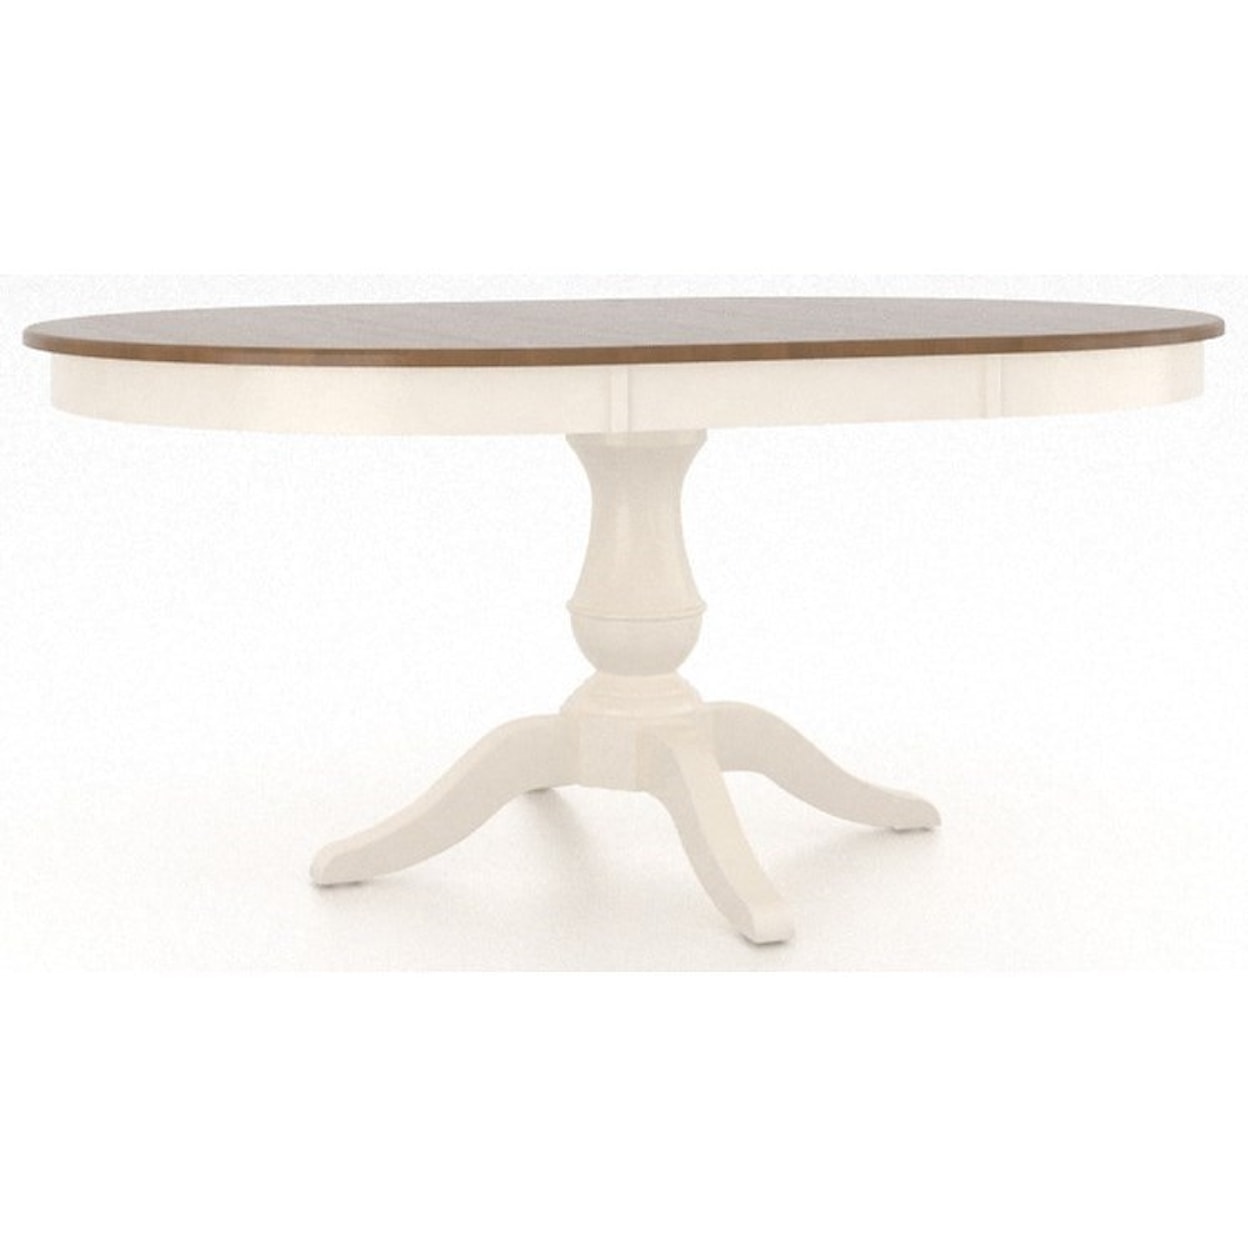 Canadel Gourmet. Customizable Round Pedestal Table with Leaf